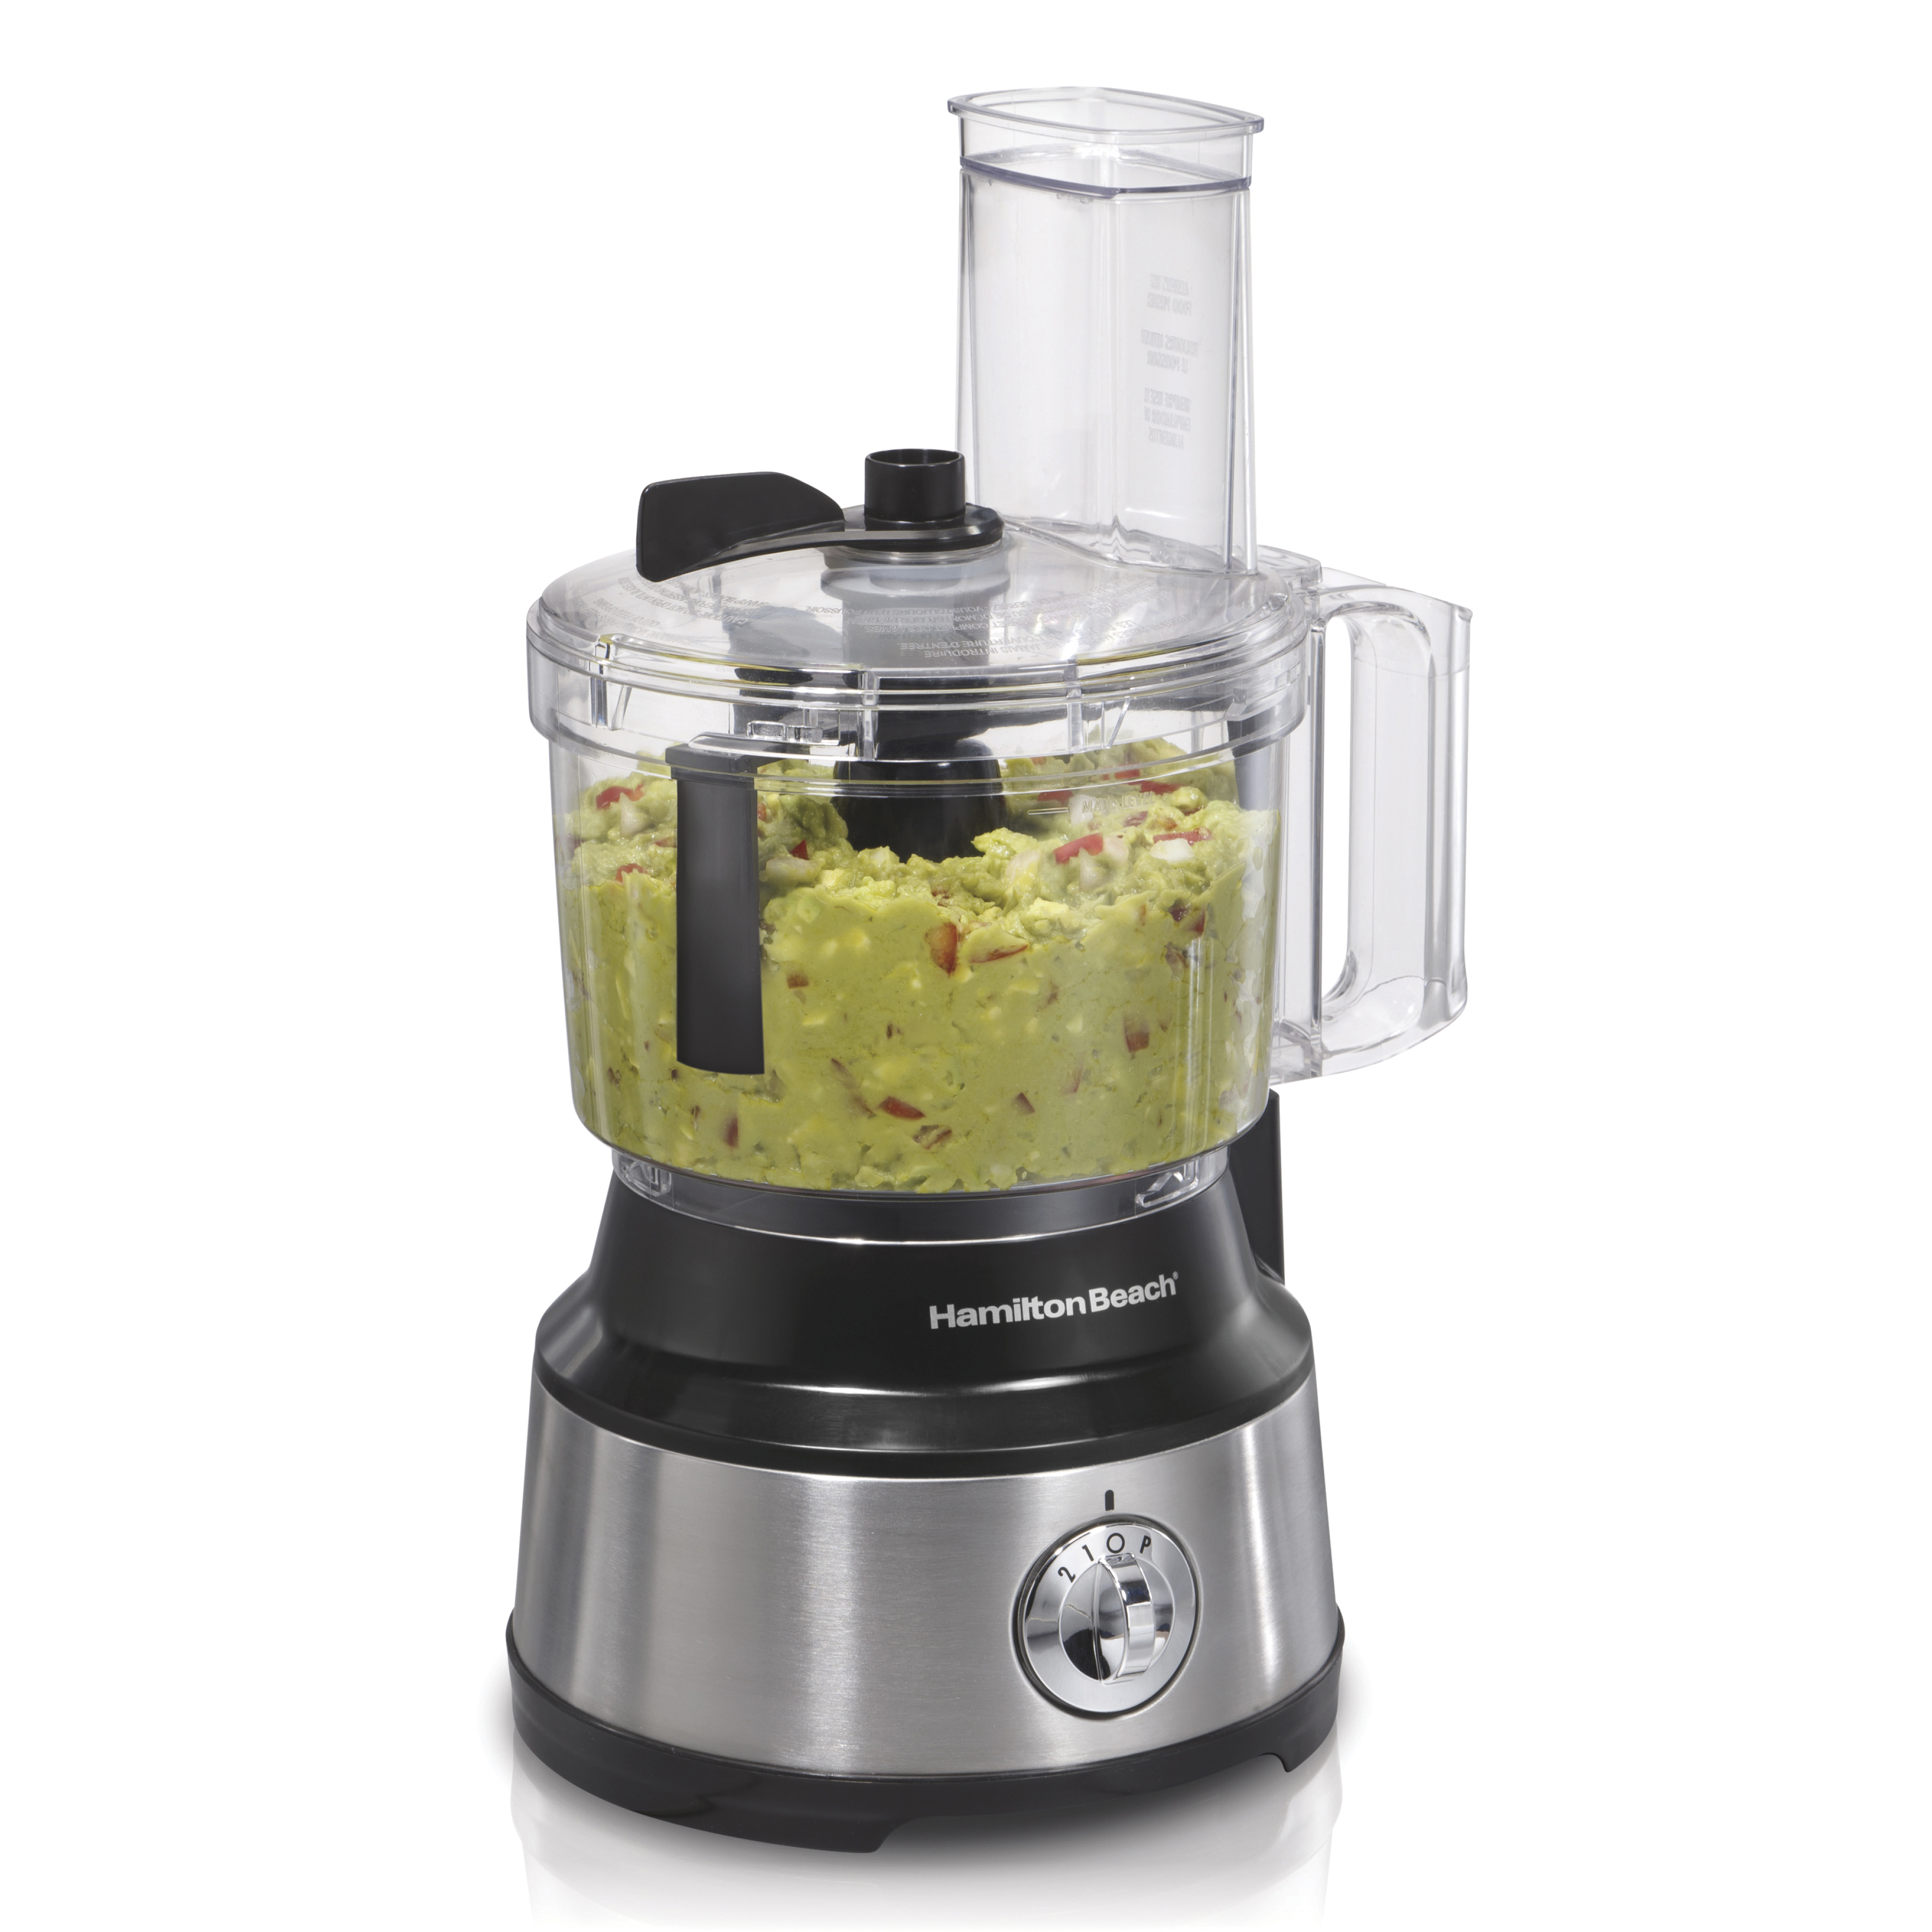 Hamilton Beach Food Processor and Vegetable Chopper with Easy Clean Bowl Scraper, 10 Cup Capacity, Stainless Steel, 70730 - image 1 of 9